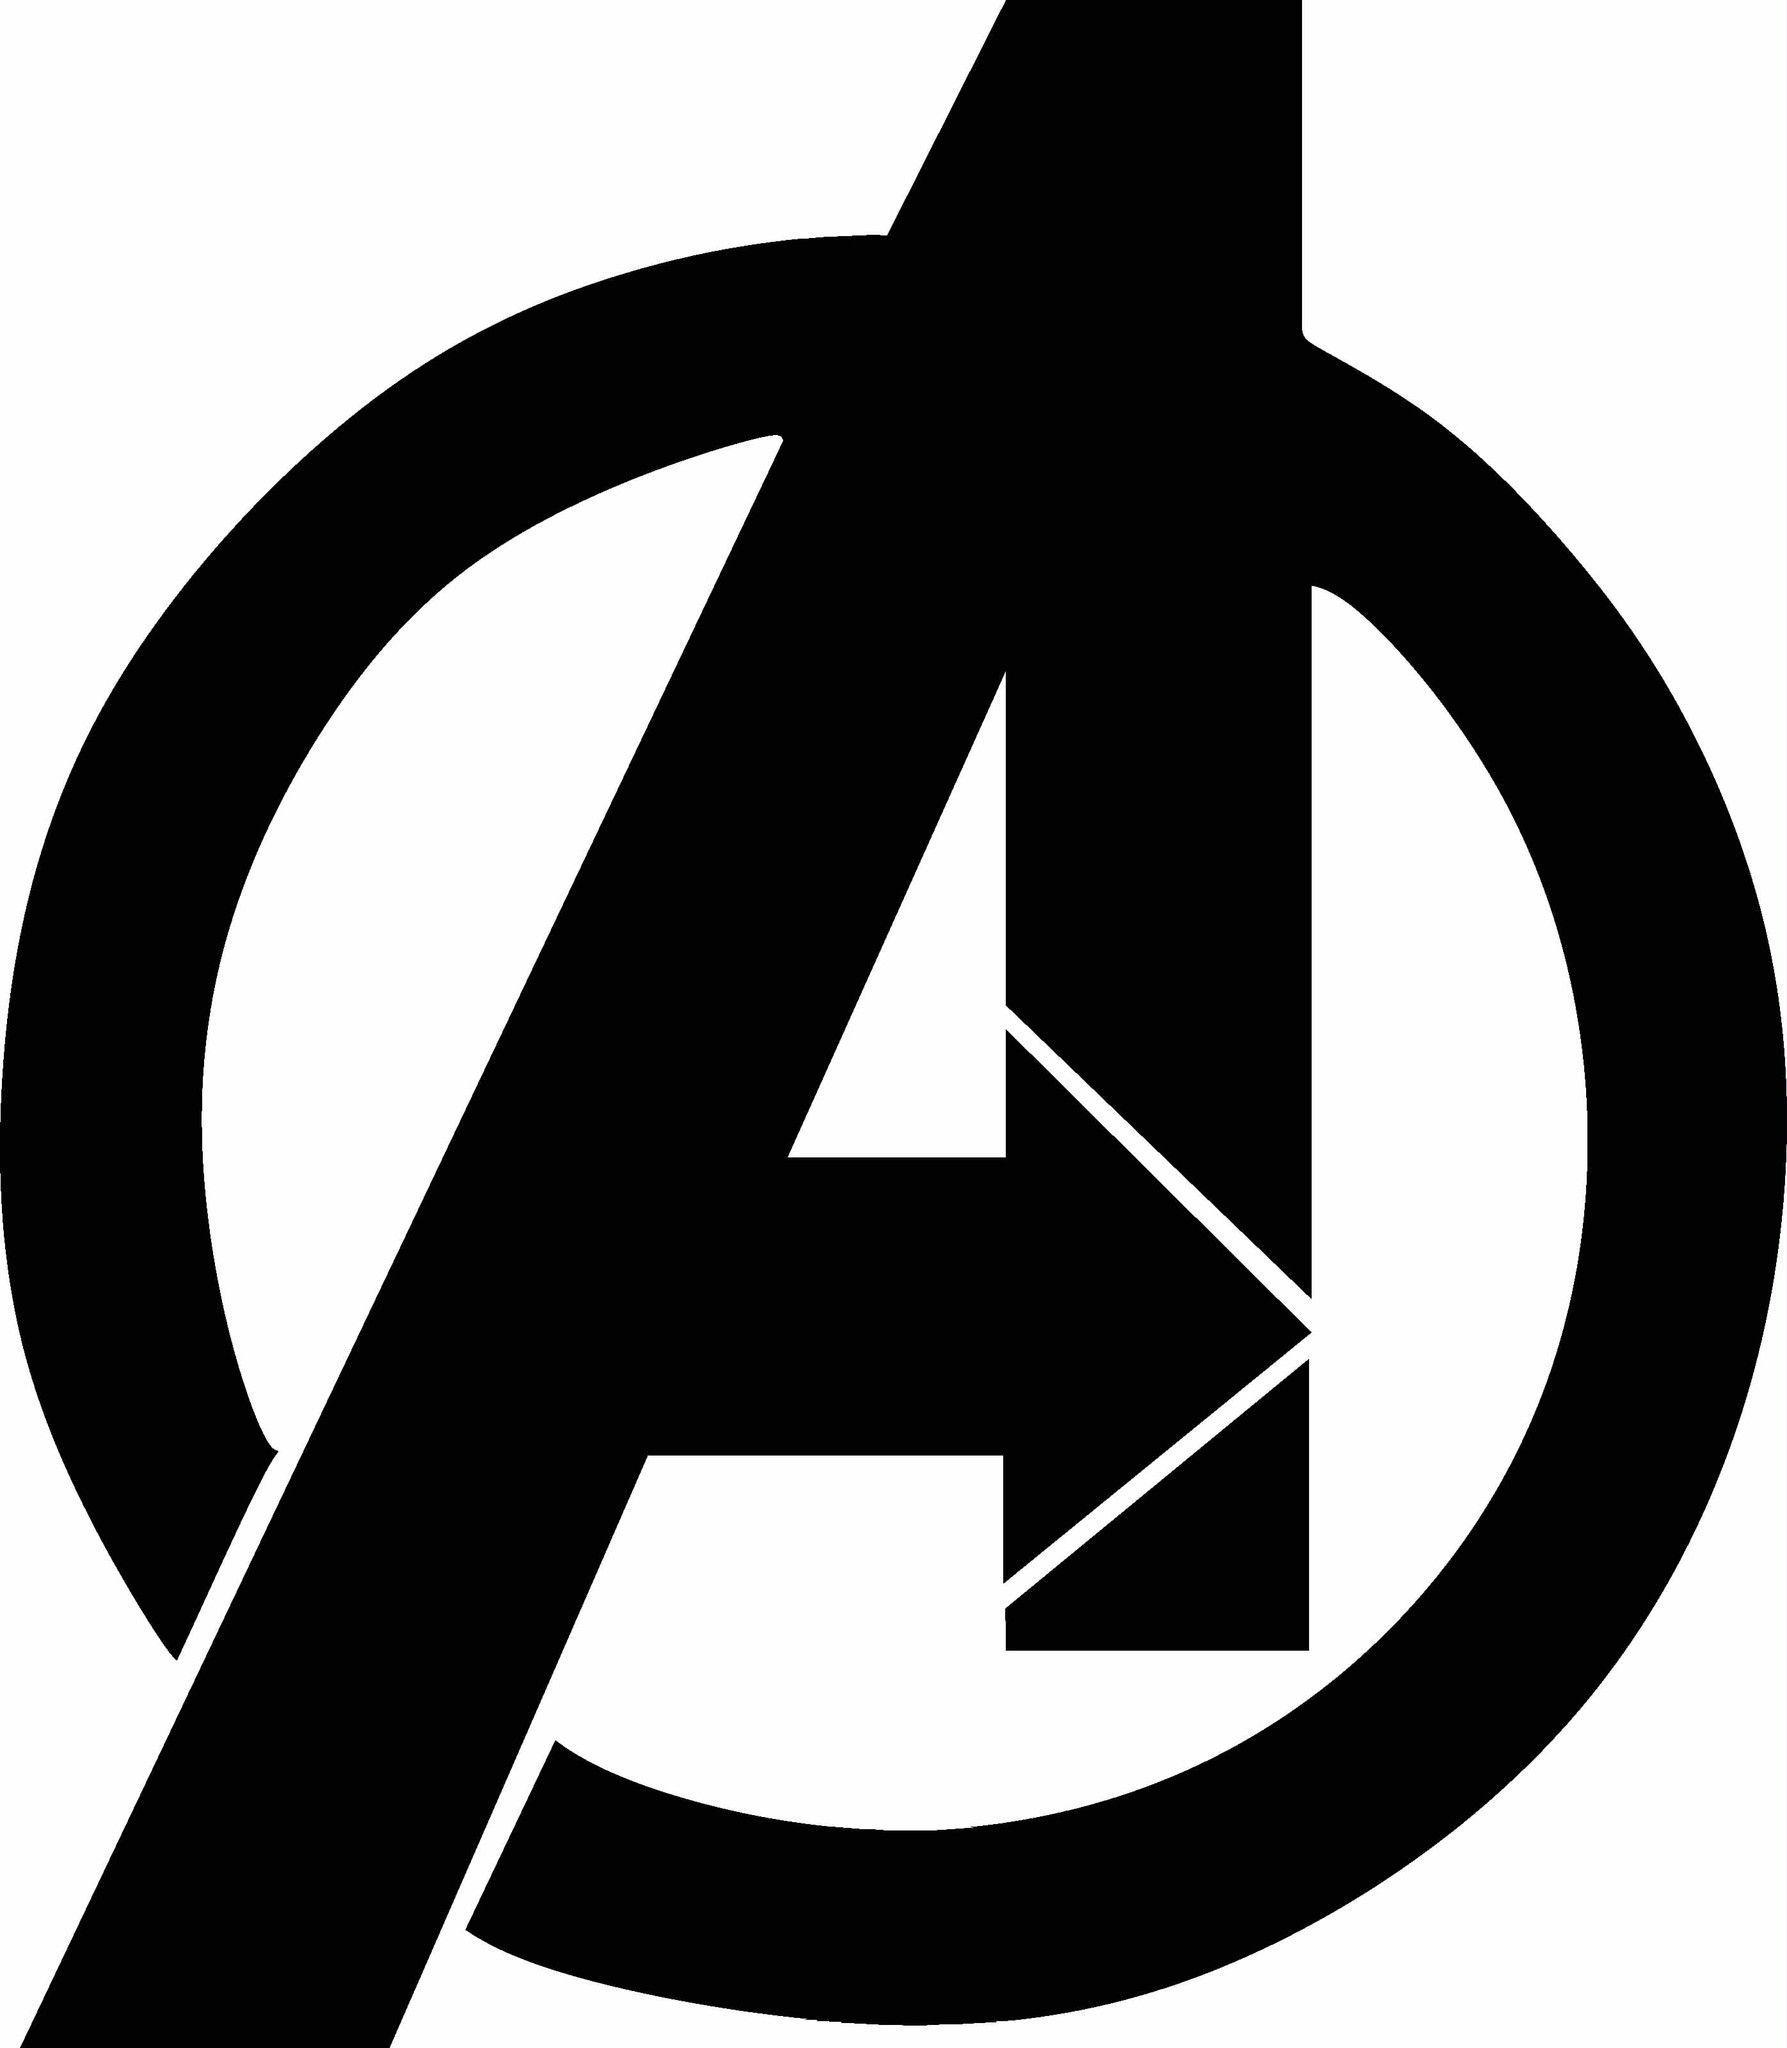 The Avengers Black and White Logo - Avengers Logo Vinyl Decal Graphic your Color and Size